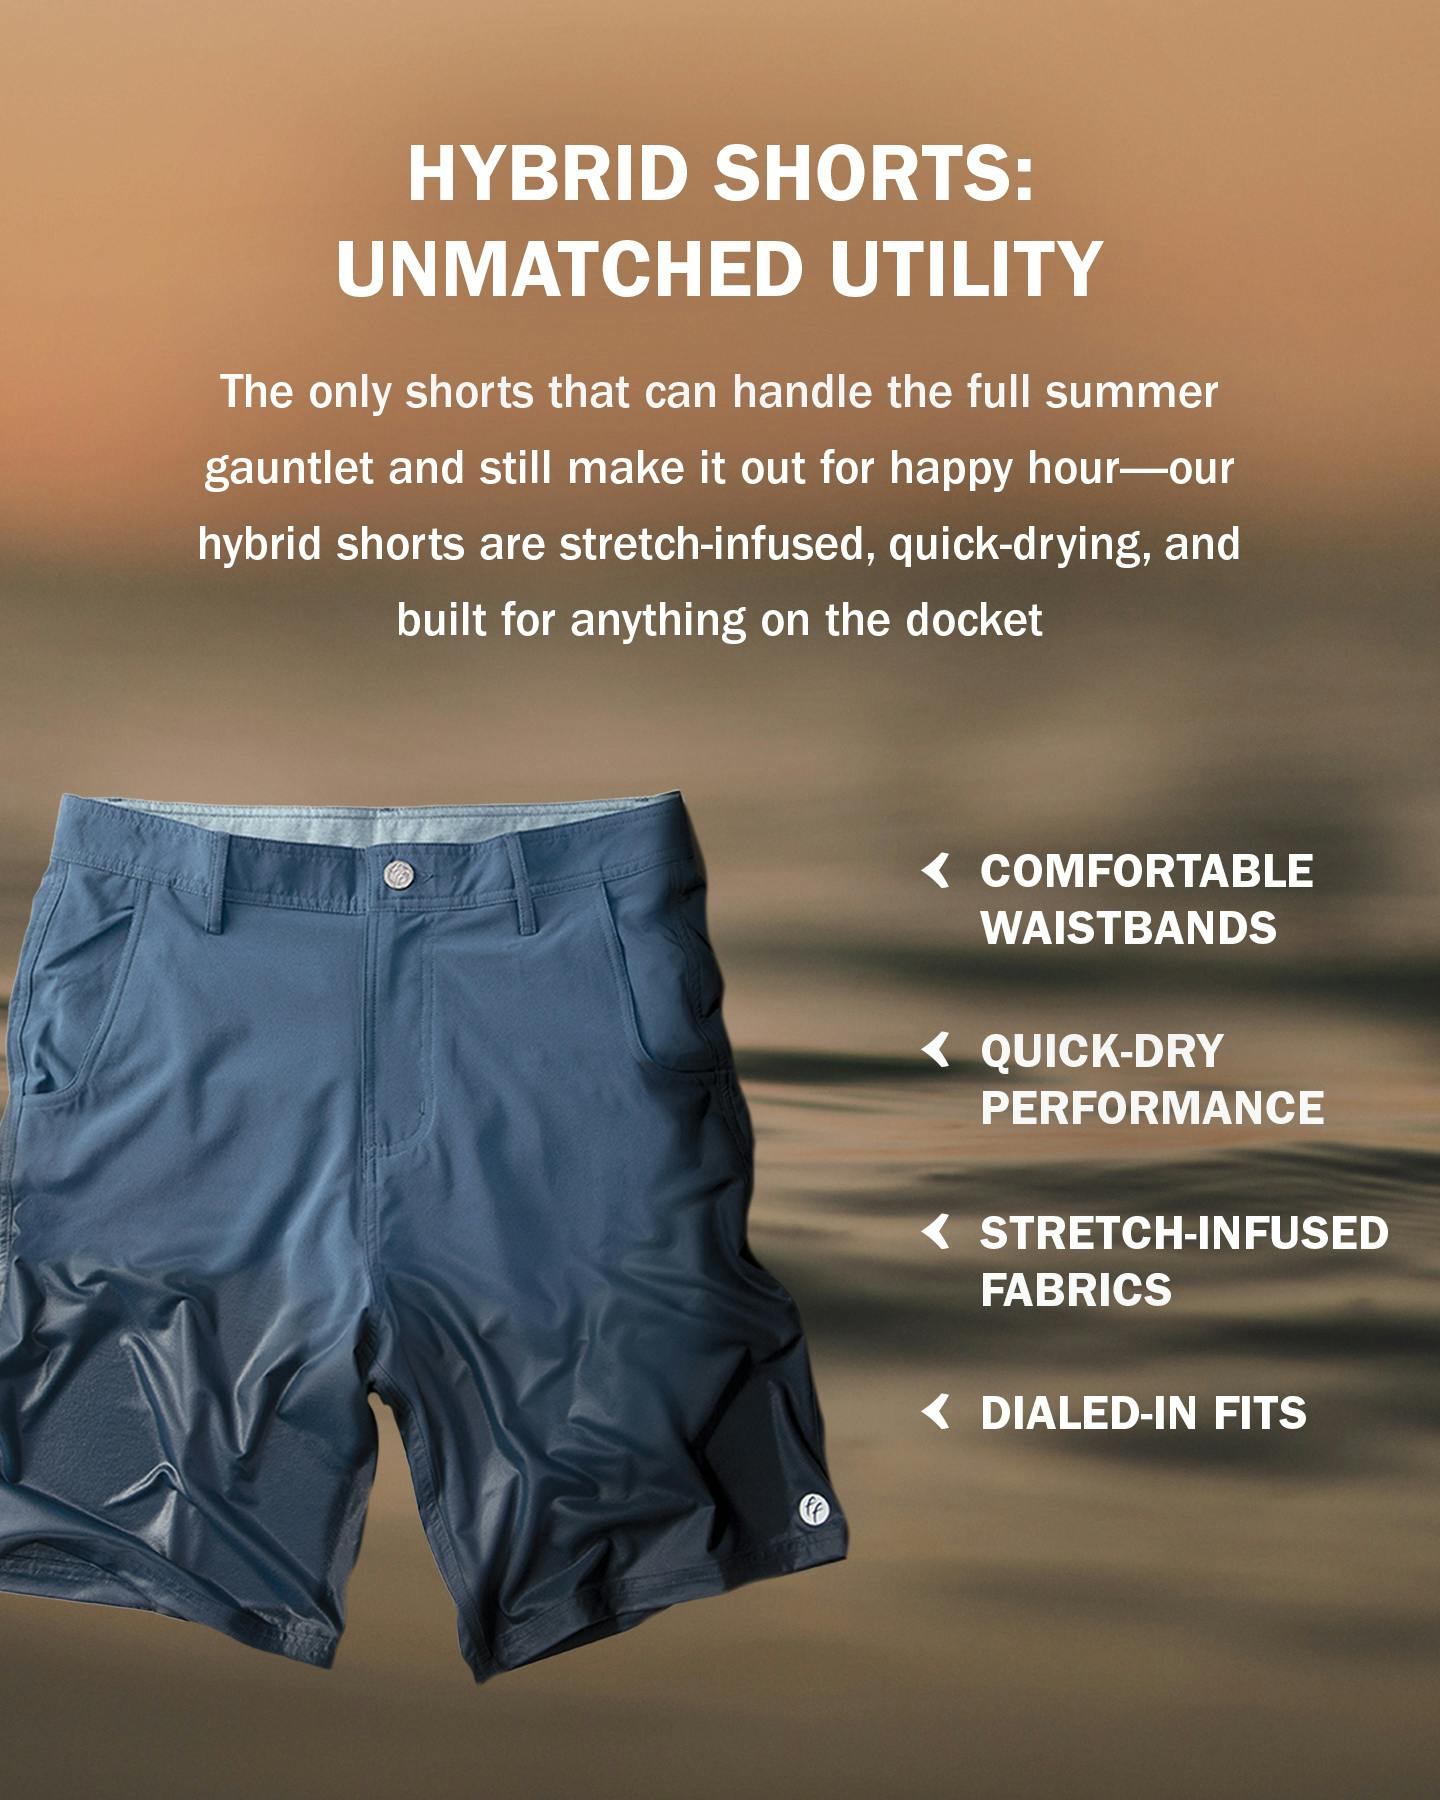 information about the utility of hybrid shorts